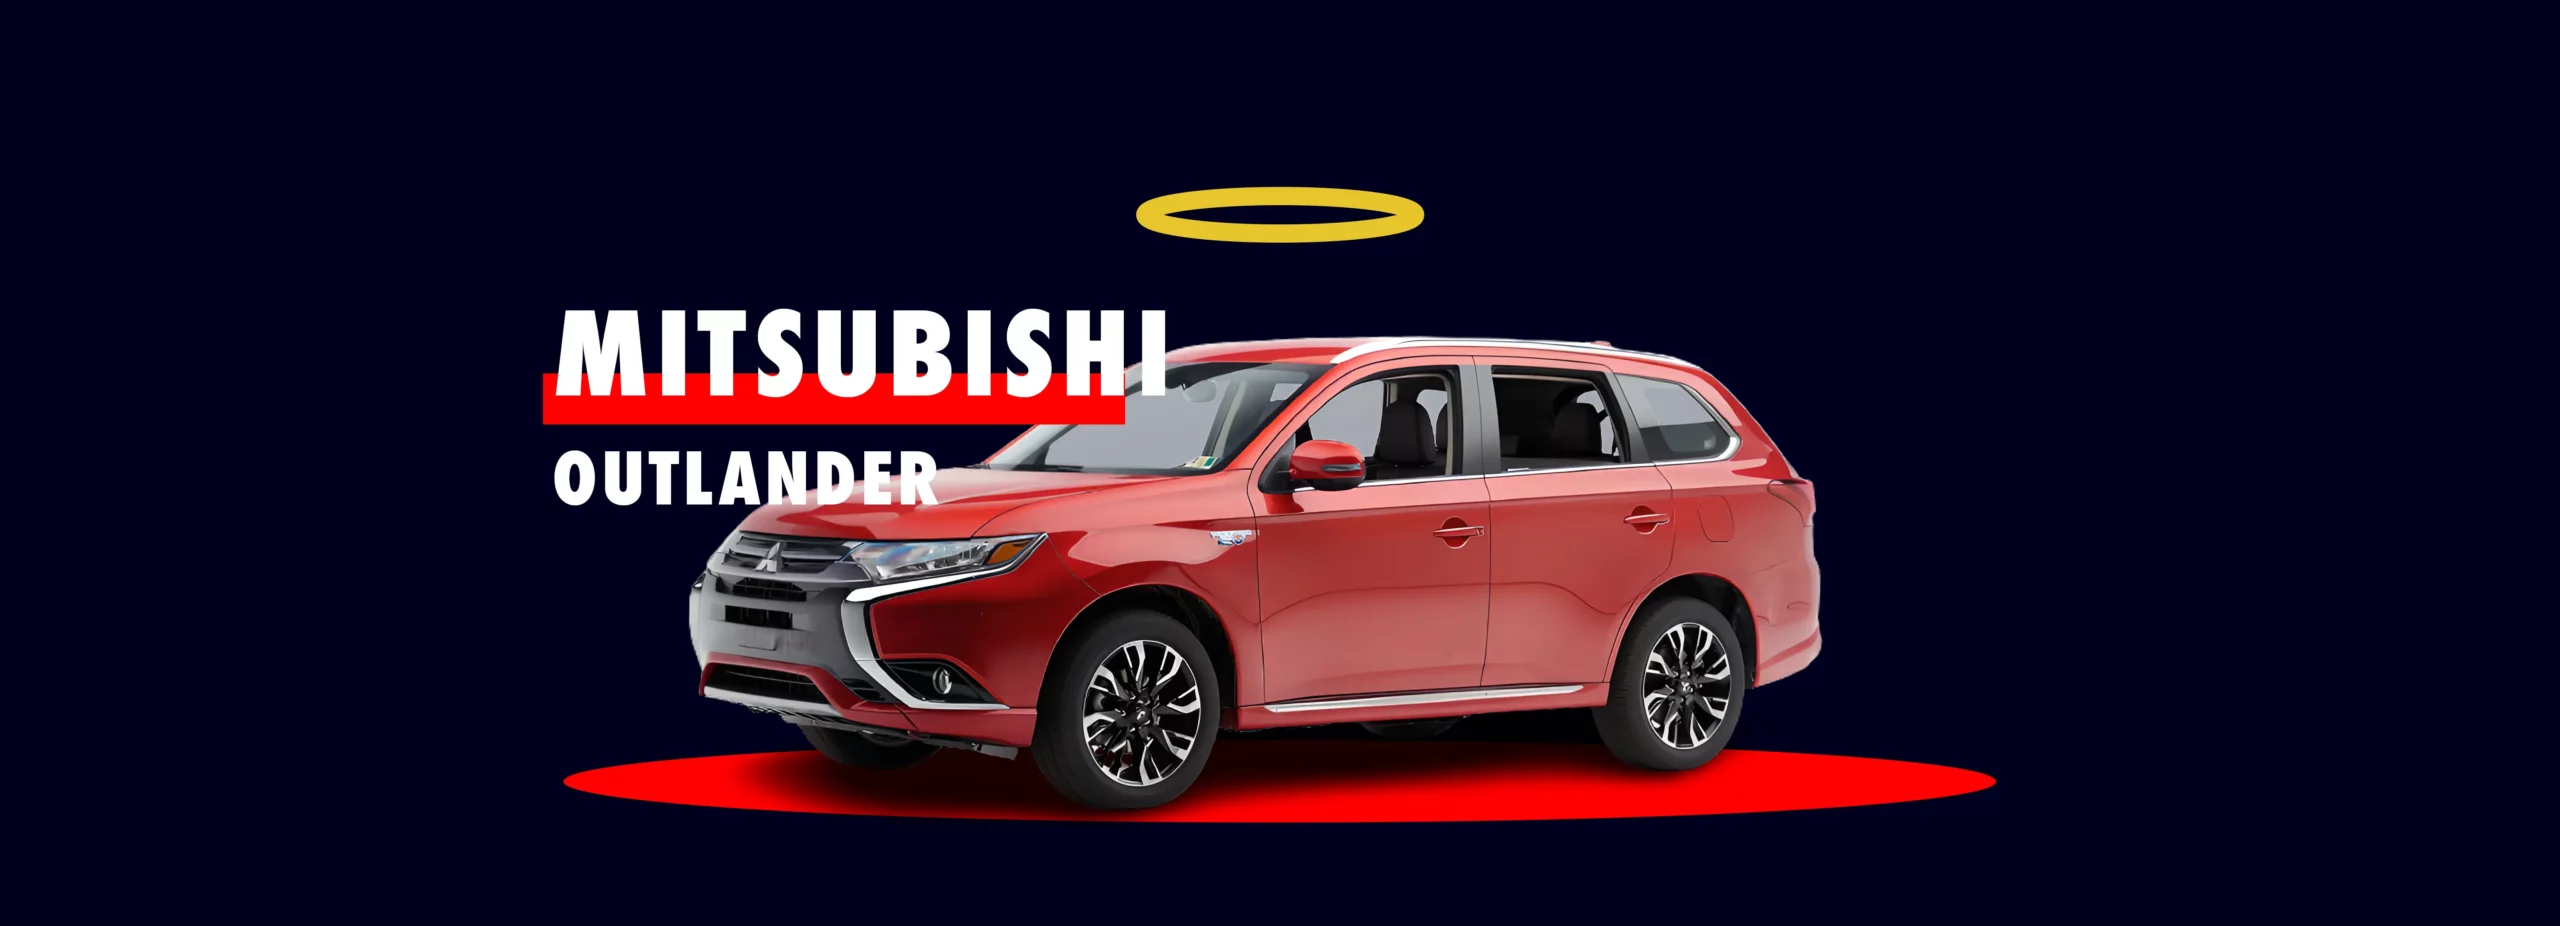 Mitsubishi Outlander PHEV rouge hybride rechargeable